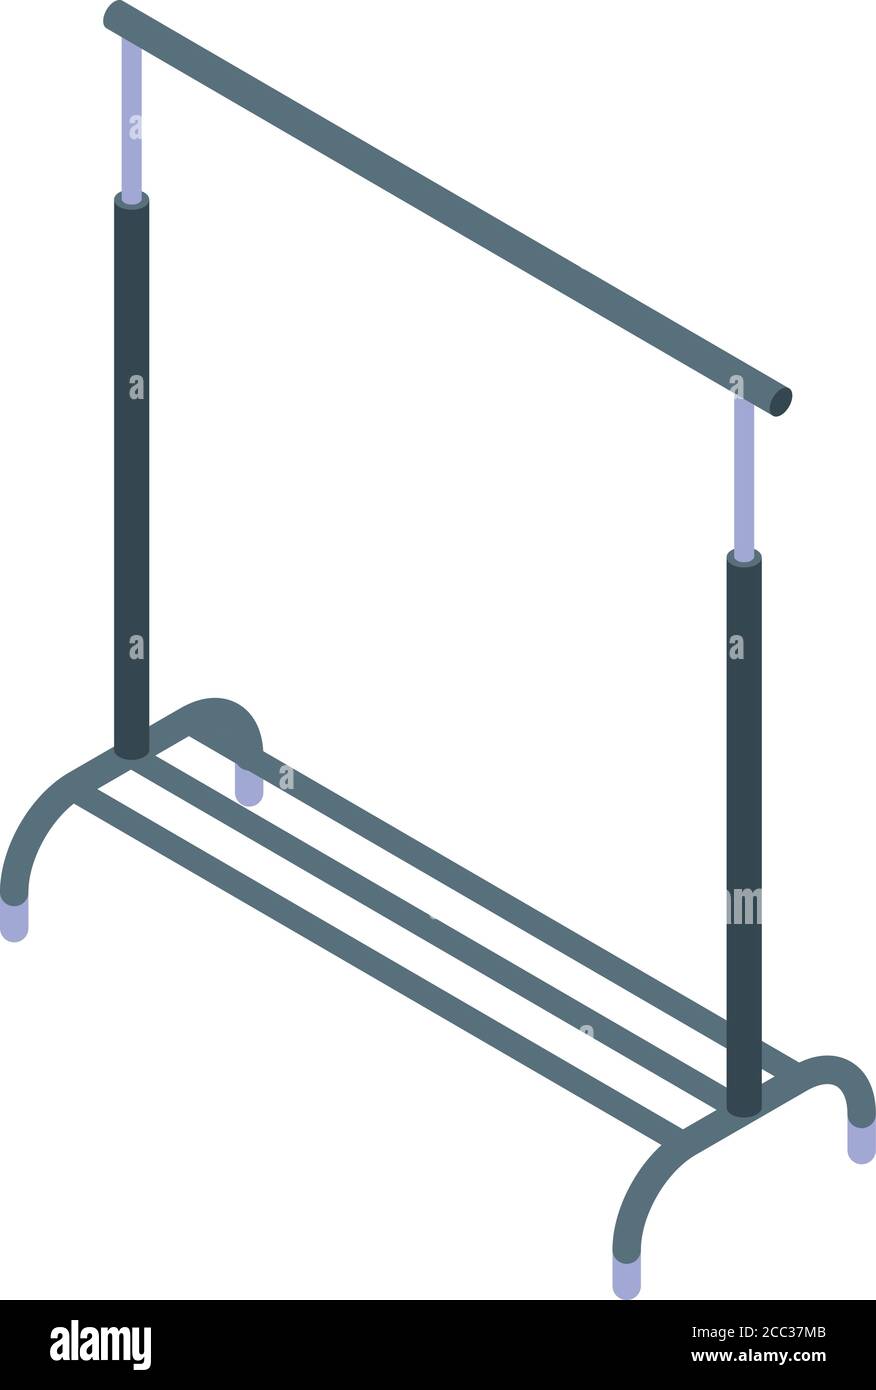 Dry cleaning clothes hanger stand icon, isometric style Stock Vector